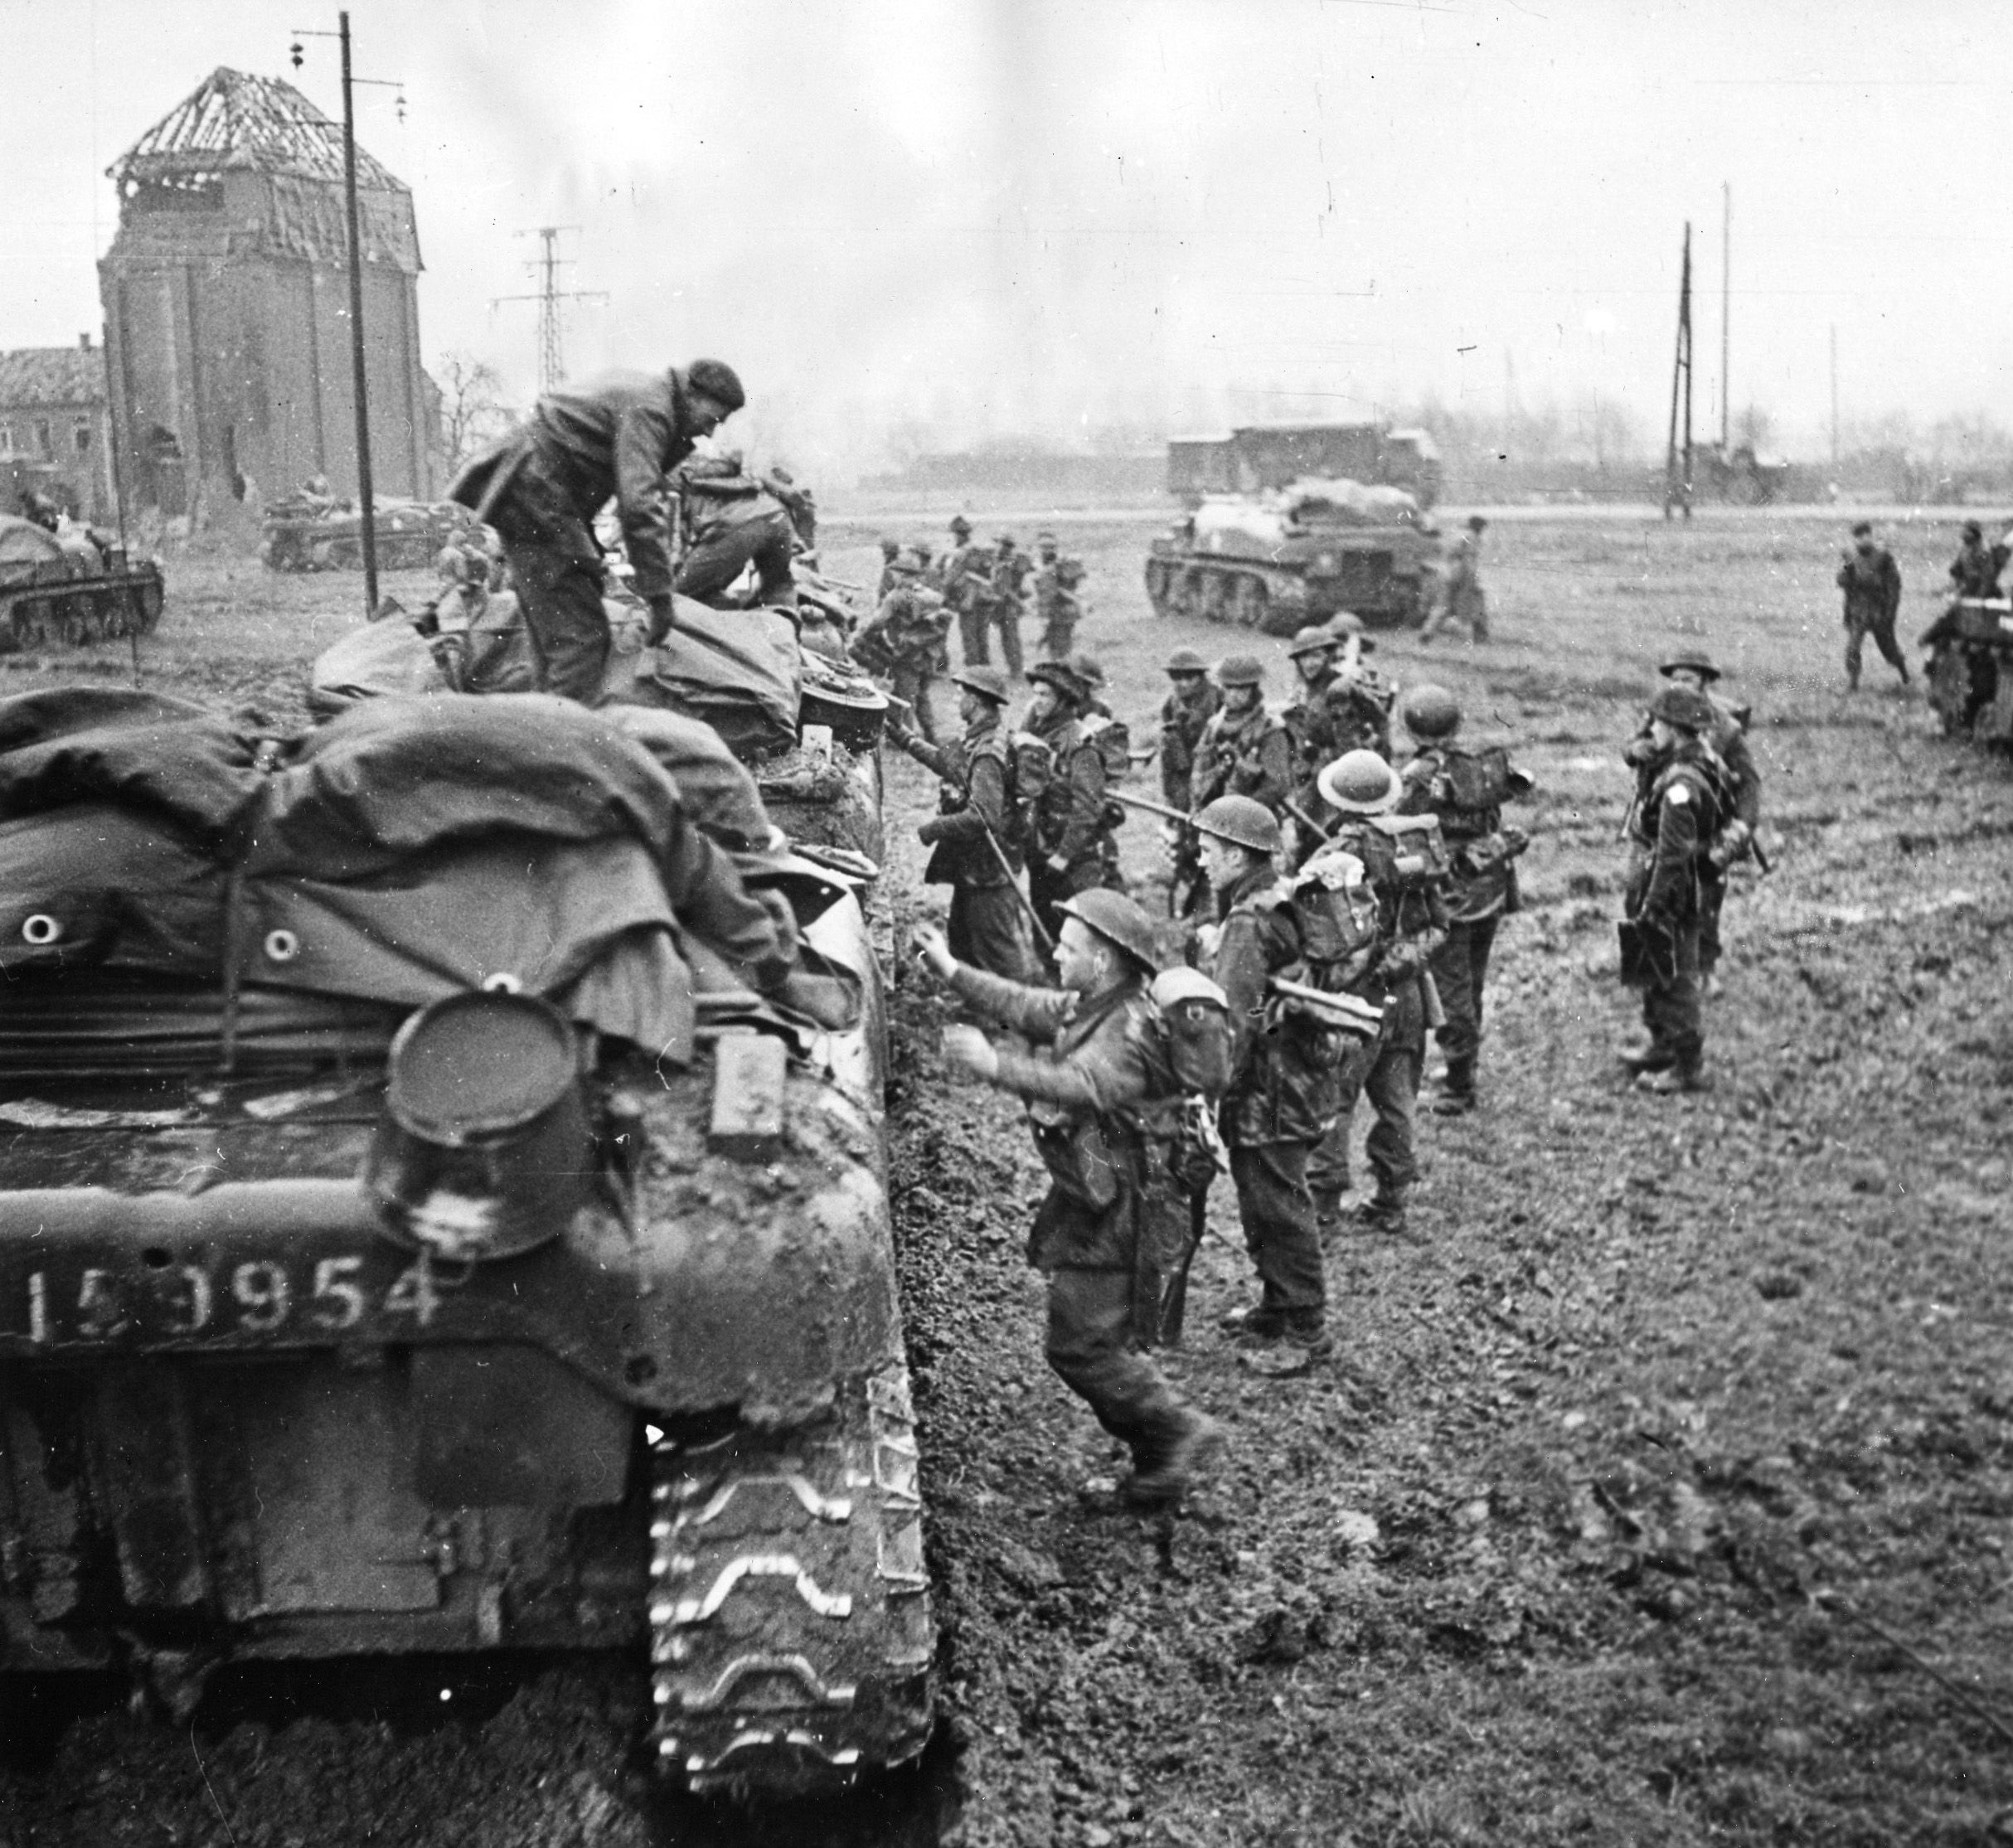 The fighting in the Reichswald wore on and took an incredible toll in both Allied and German casualties. On March 2, 1945, British soldiers prepare to board Kangaroo troop carriers for the assault on the German town of Kervenheim, three miles south of Udem, another key town that had to be taken during the sluggish advance toward the Ruhr.